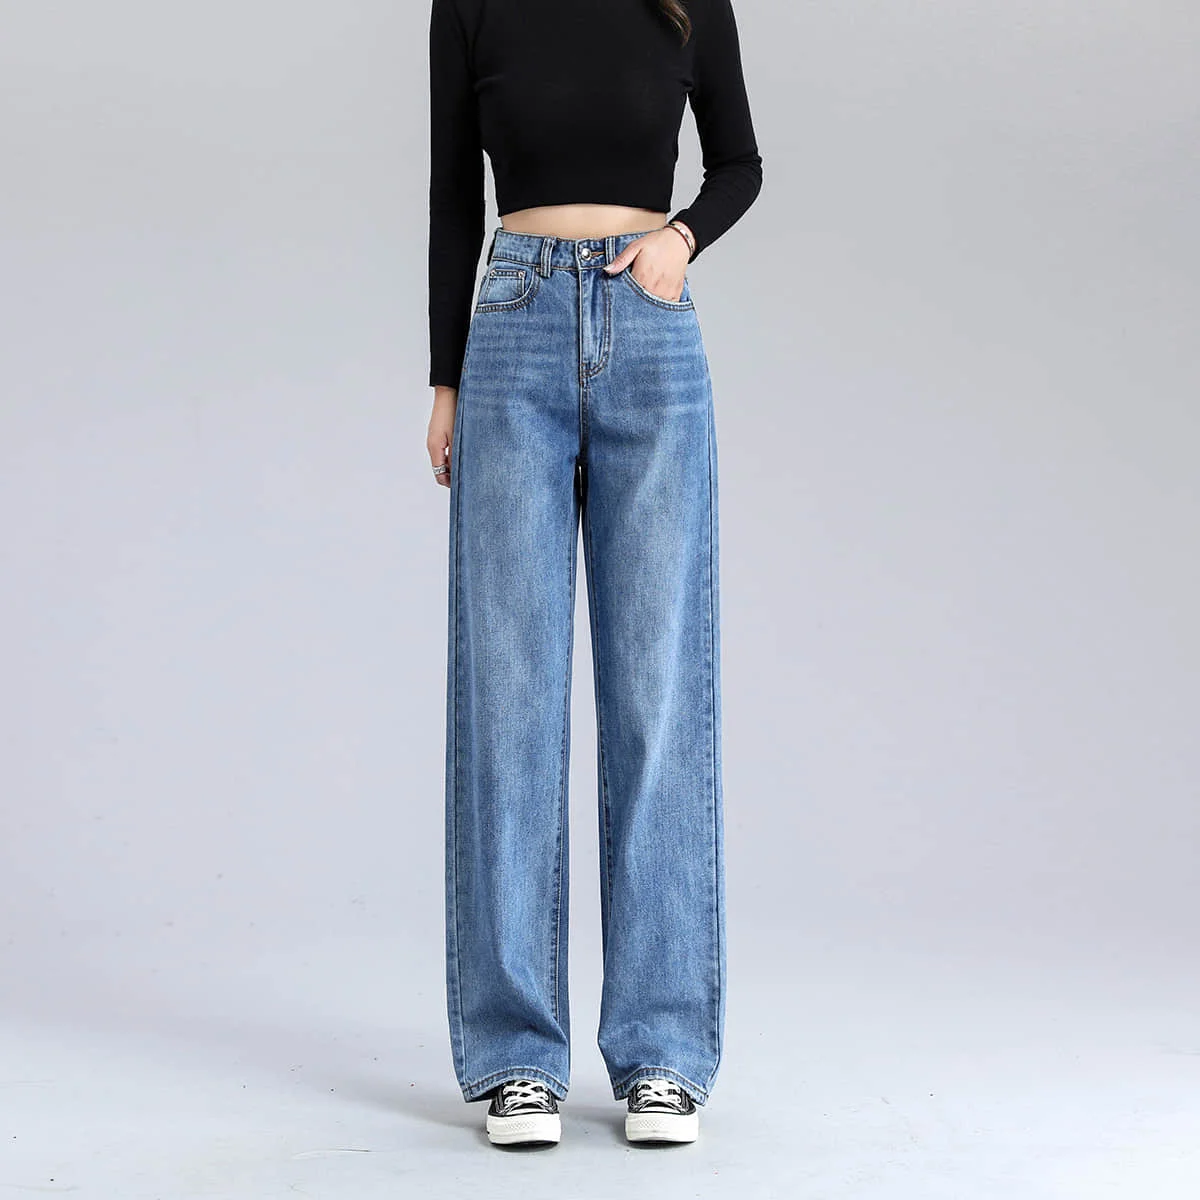 Woman Classic Jeans Luxury Brand Acne Ac Studios Lady Street Fashion Pants High Waist Jeans Female Washed Denim Fit Full Jeans